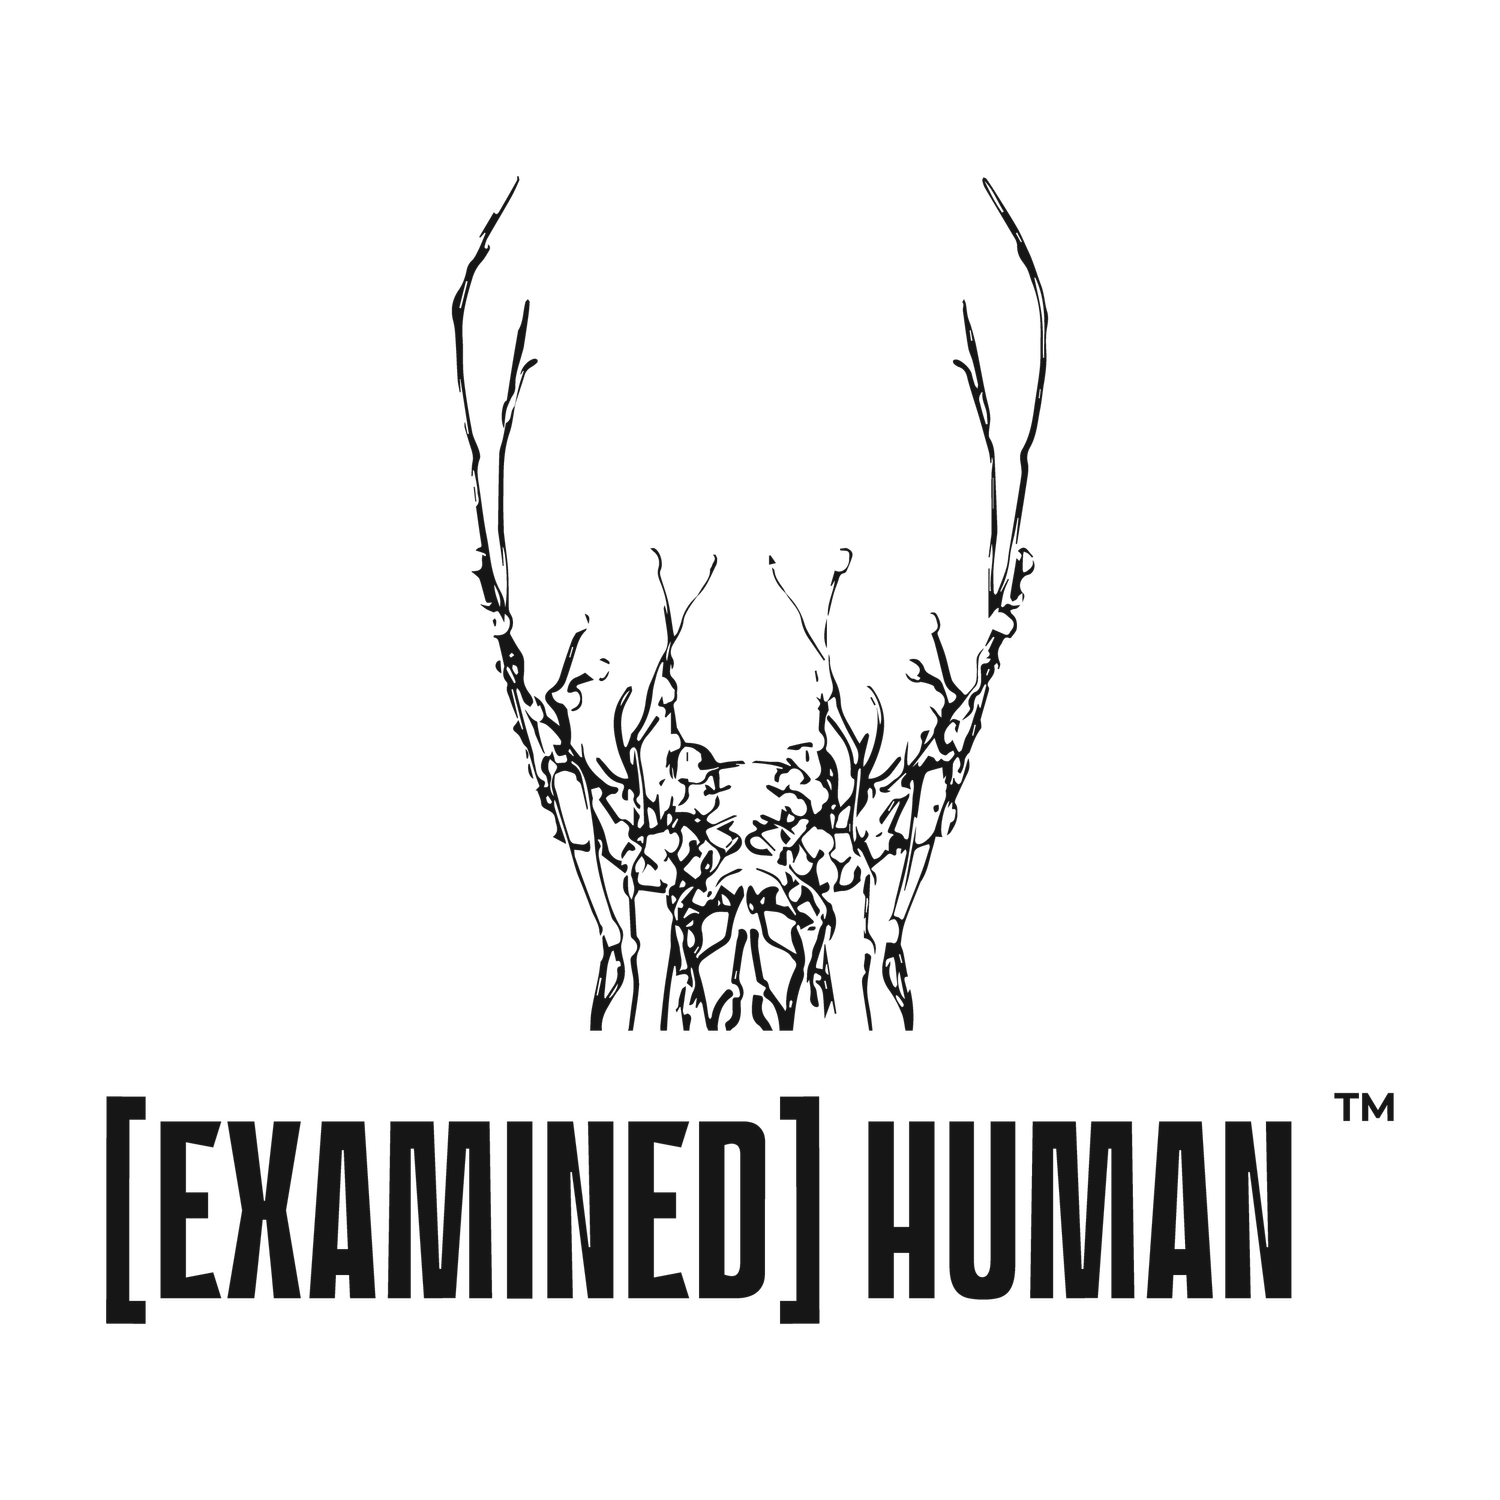 [Examined] Human Official Site